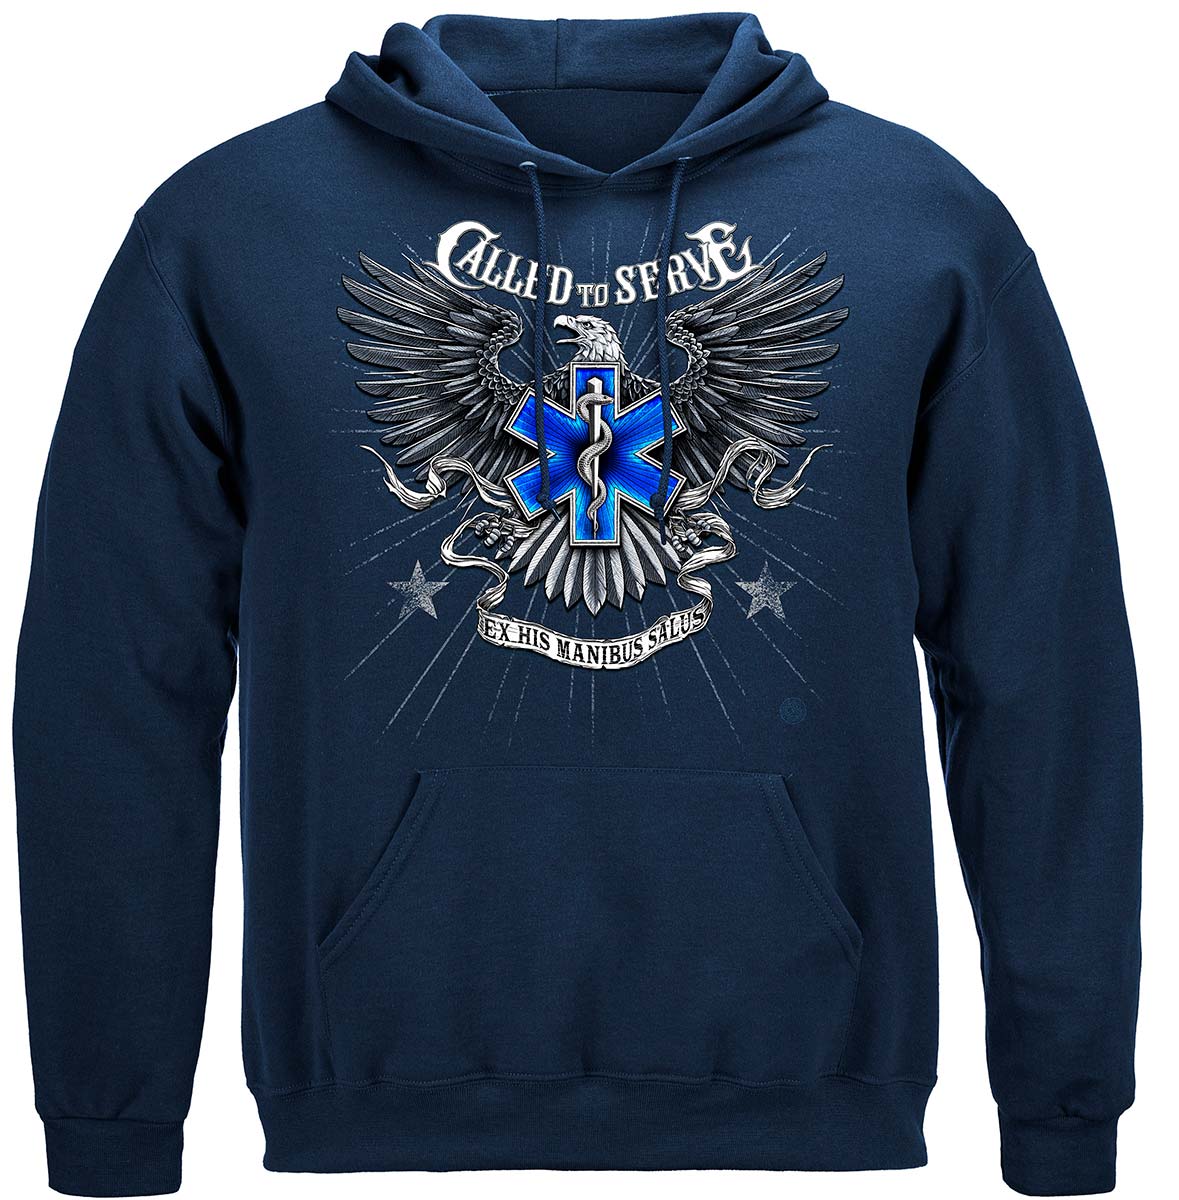 EMS Called To Serve Premium Hooded Sweat Shirt